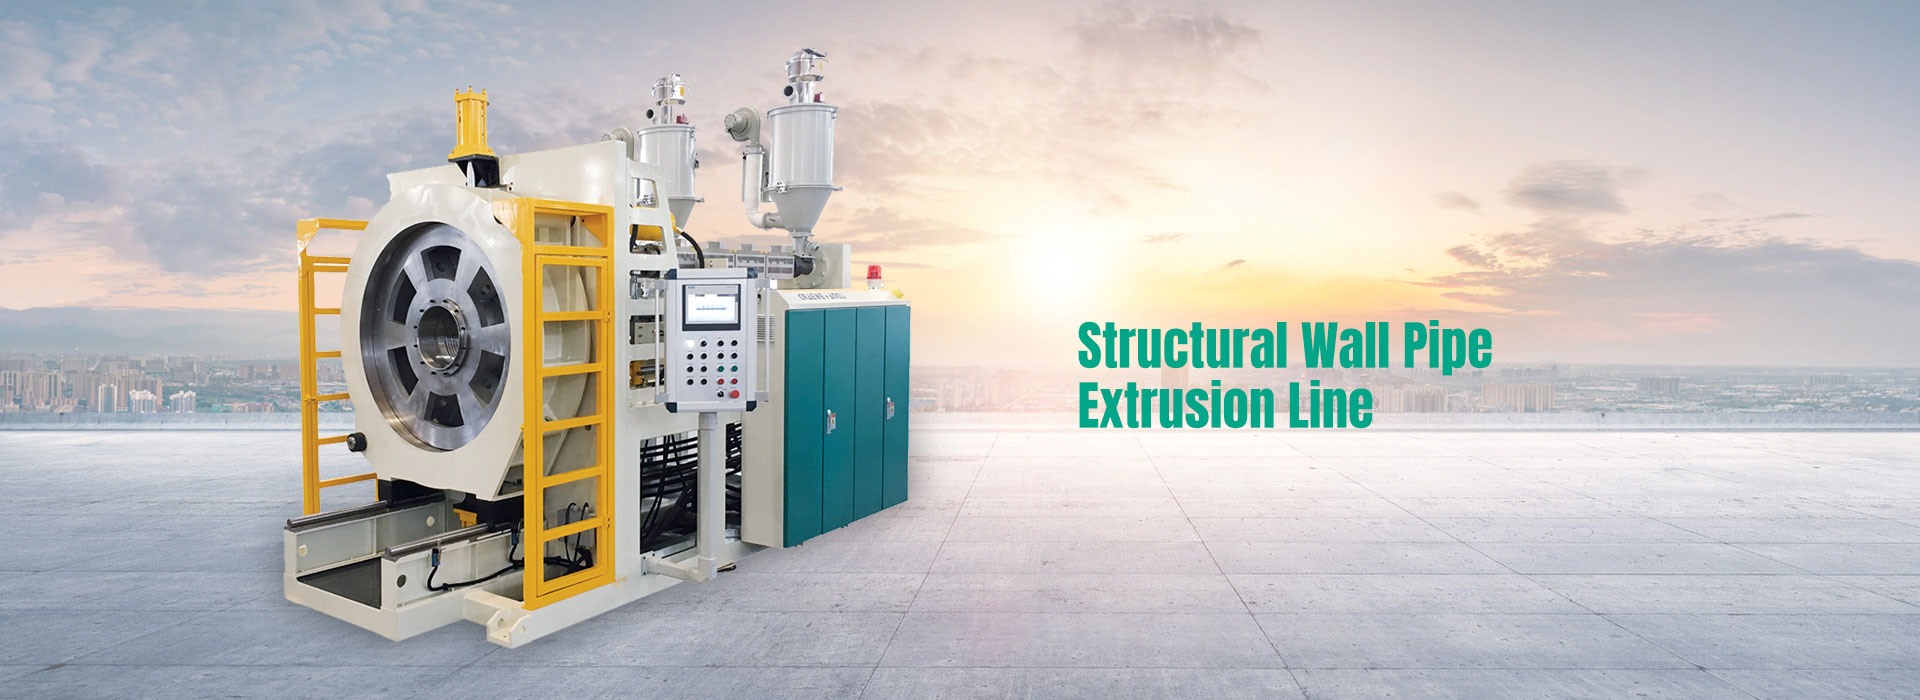 Structured Wall Pipe Extrusion Line